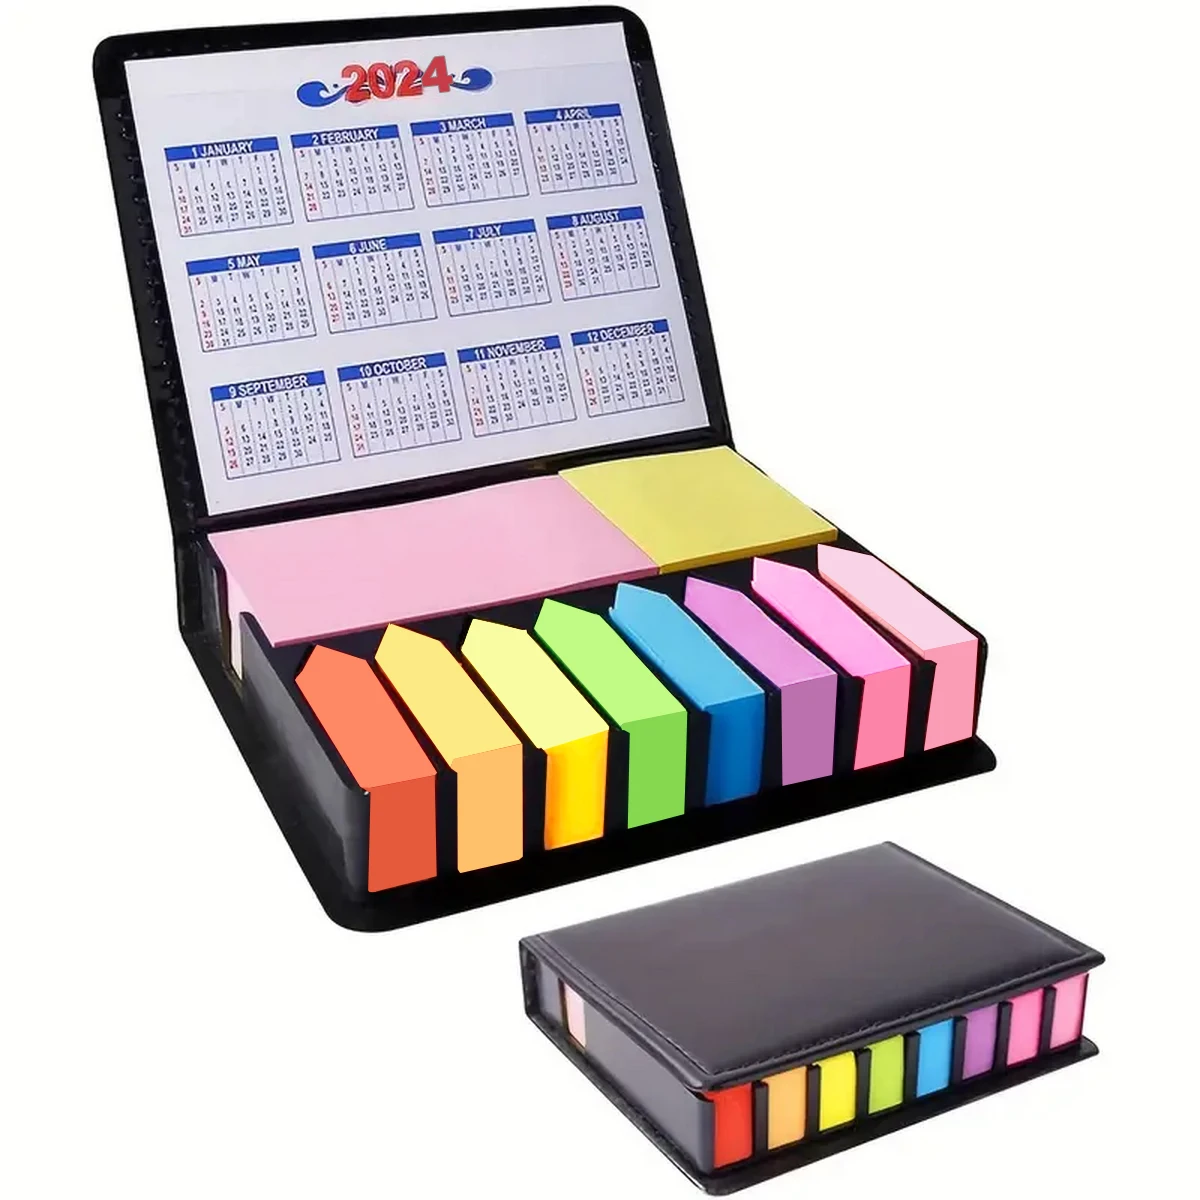 

Multicolor Sticky Note Set, Color Memo Pads With PU Leather Packing Box, Colored Divider Self-Stick Notes Pads Calendar Bundle